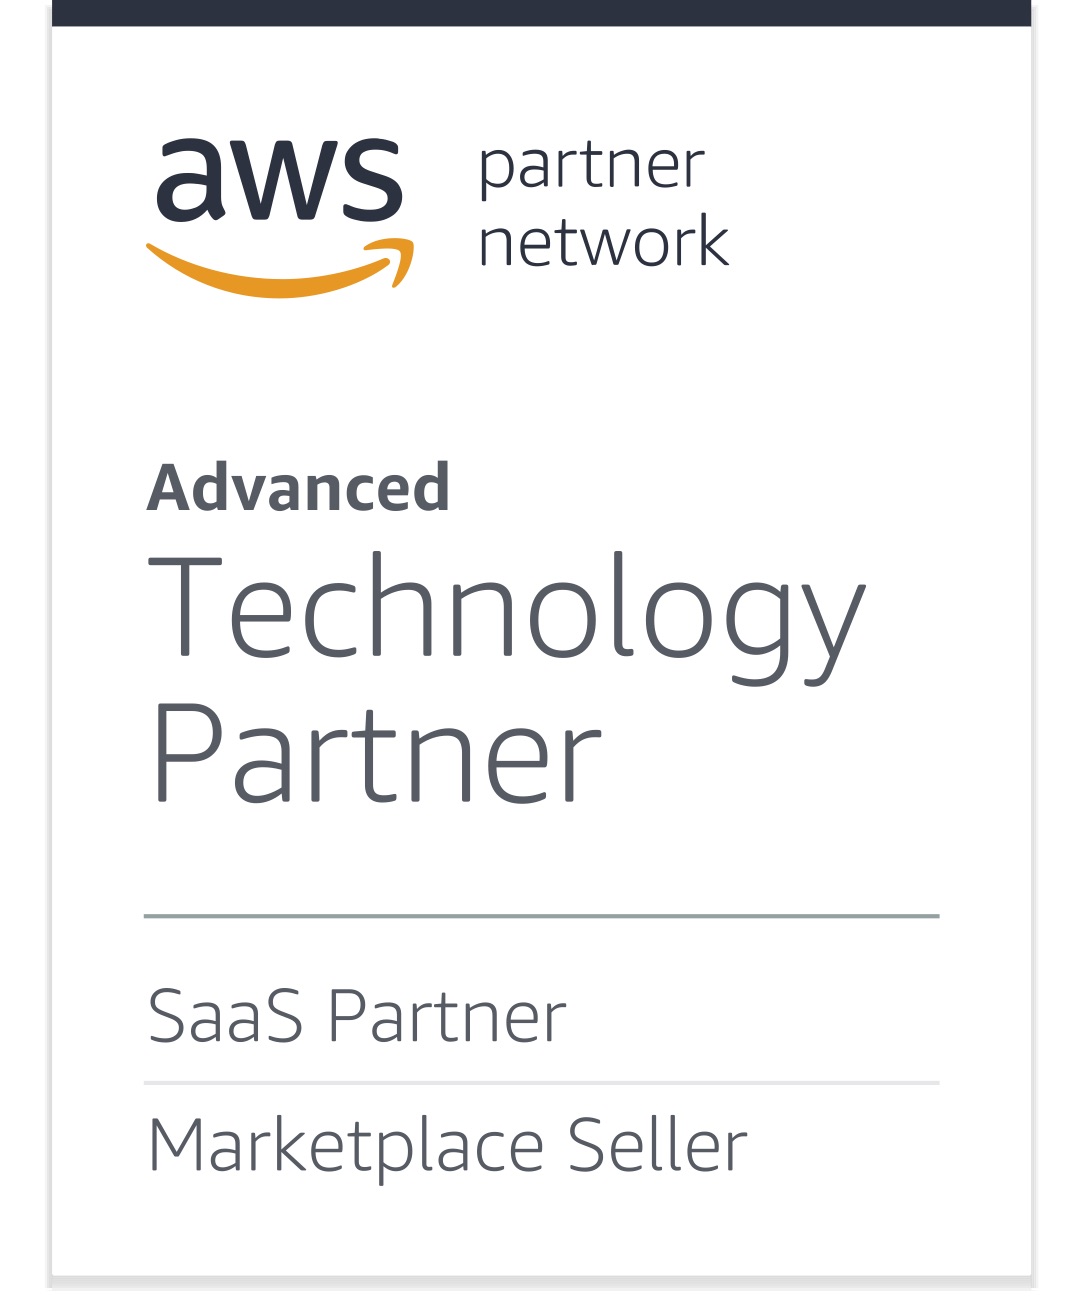 RedLine13 is an AWS Advanced Technology Partner for Amazon Load Testing Tools